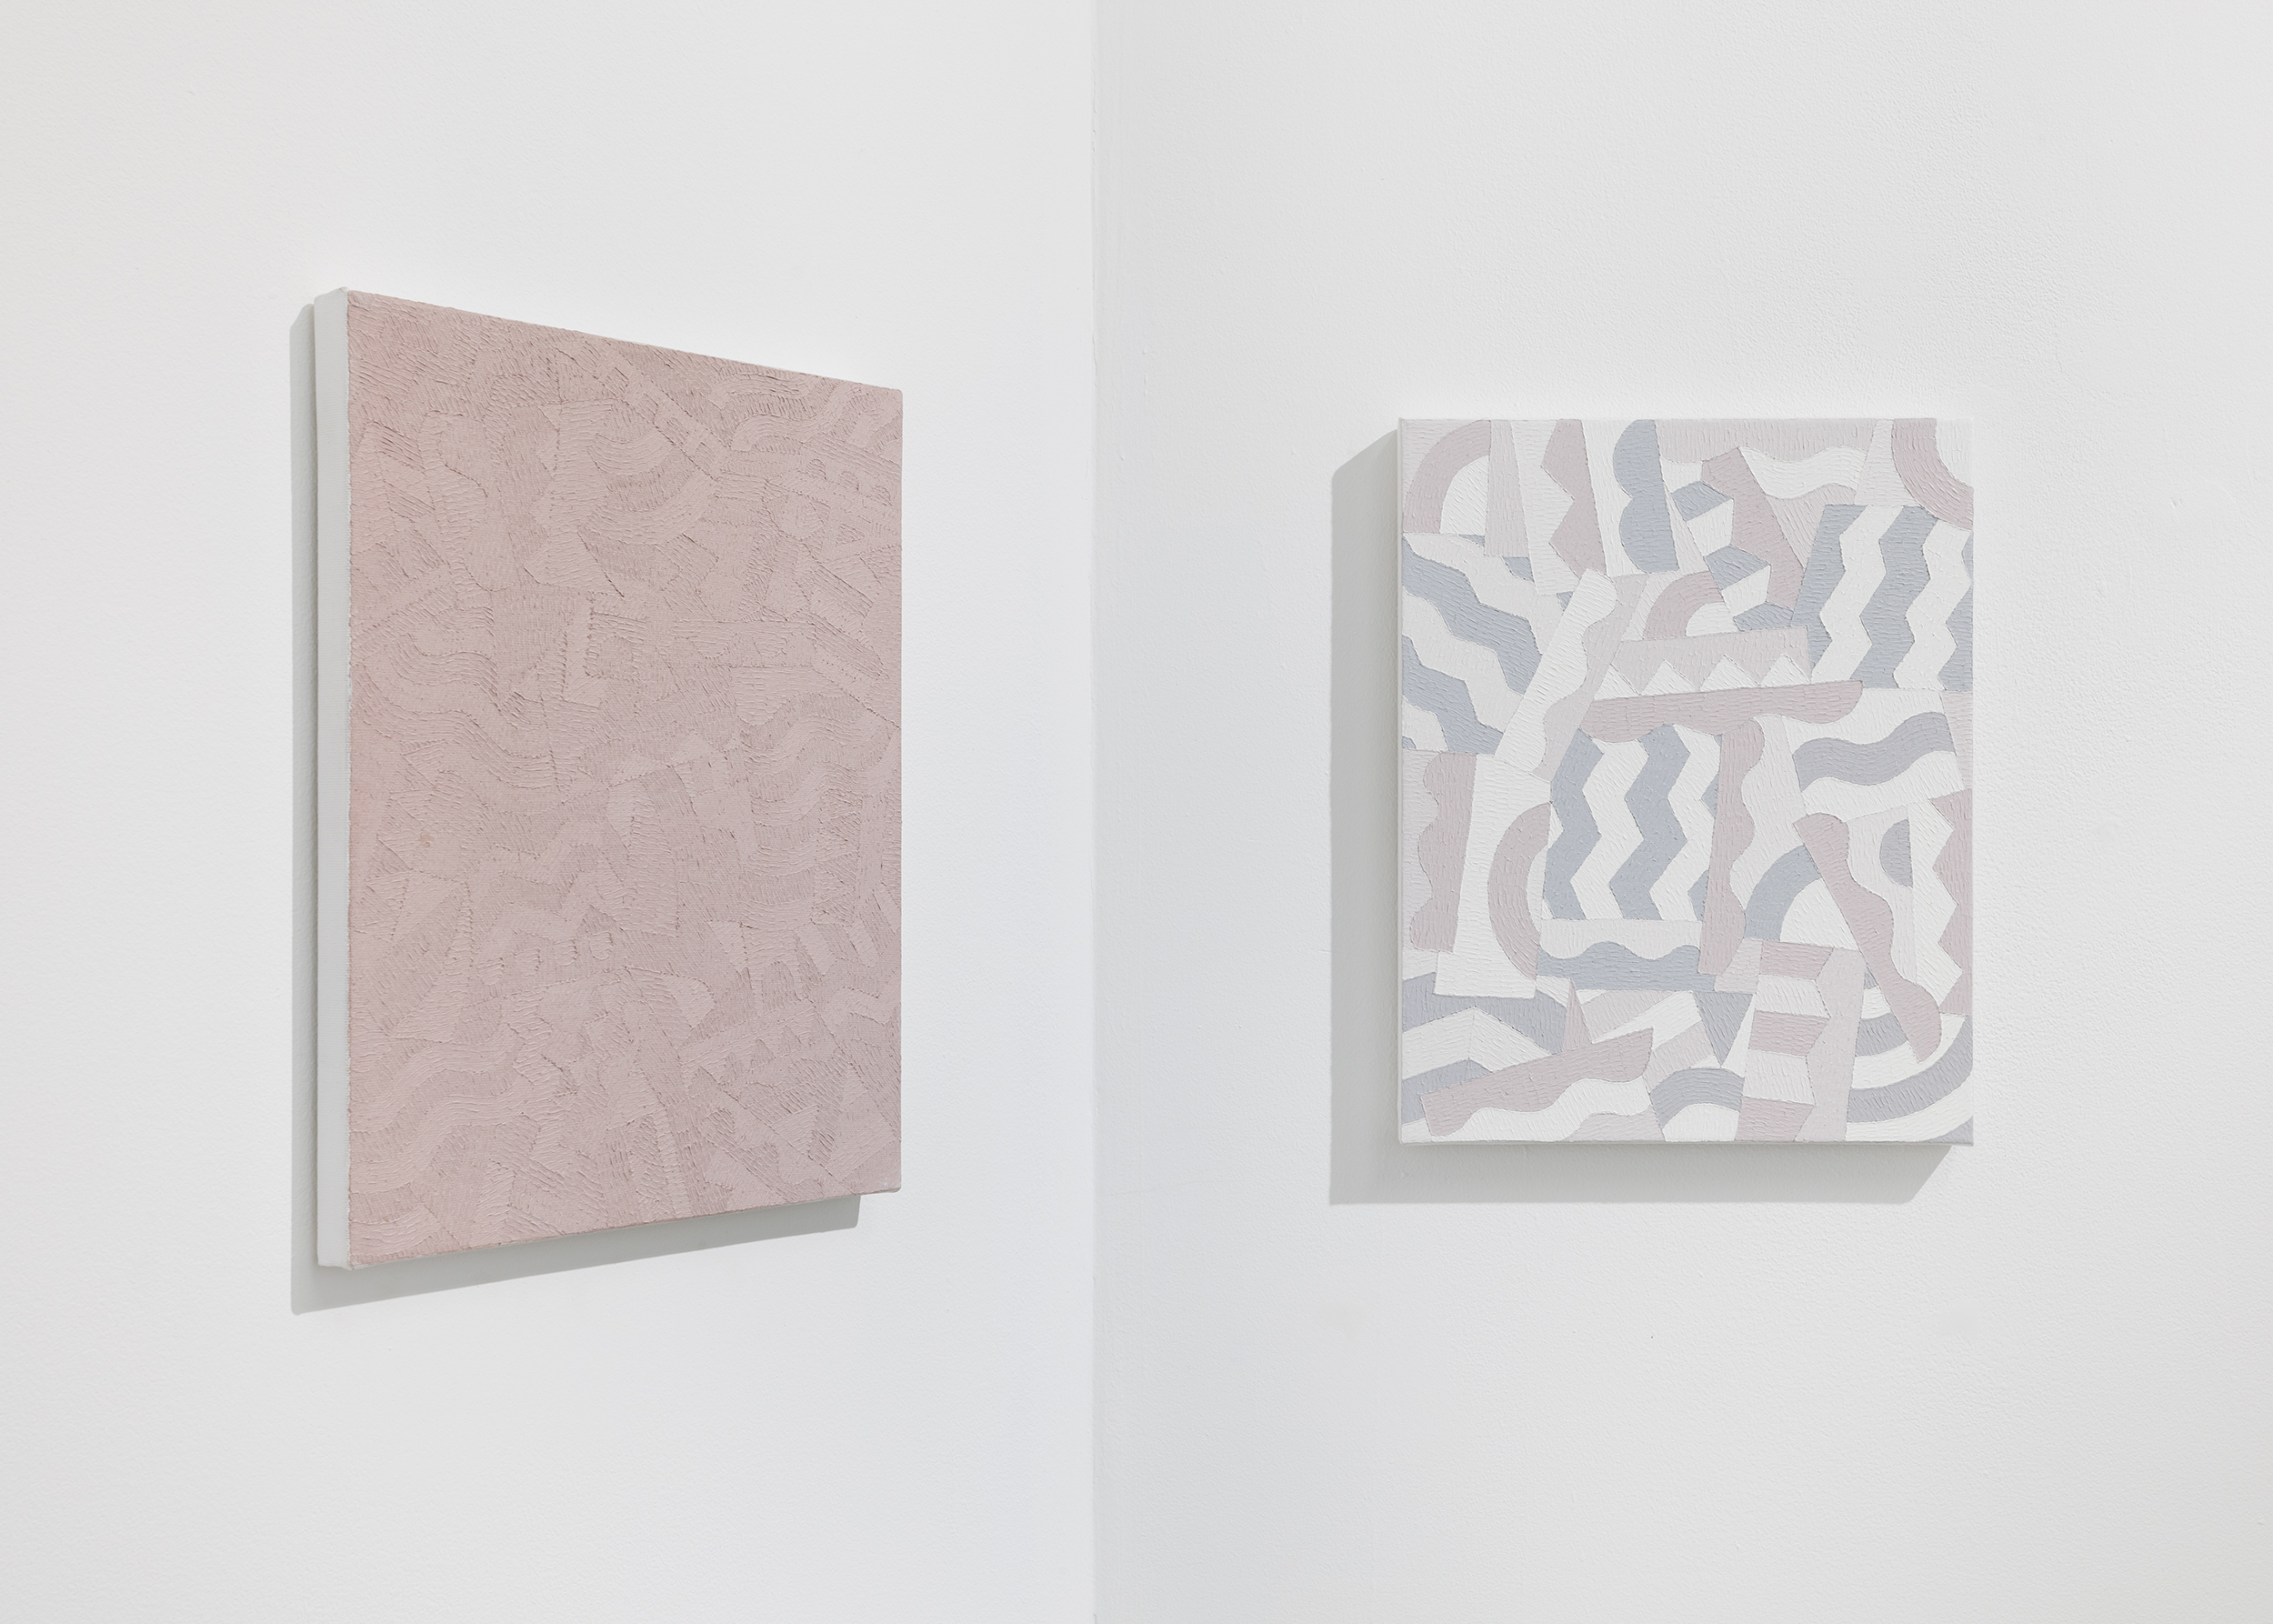 Installation view of Timothy Hull solo exhibition showing view of two small paintings